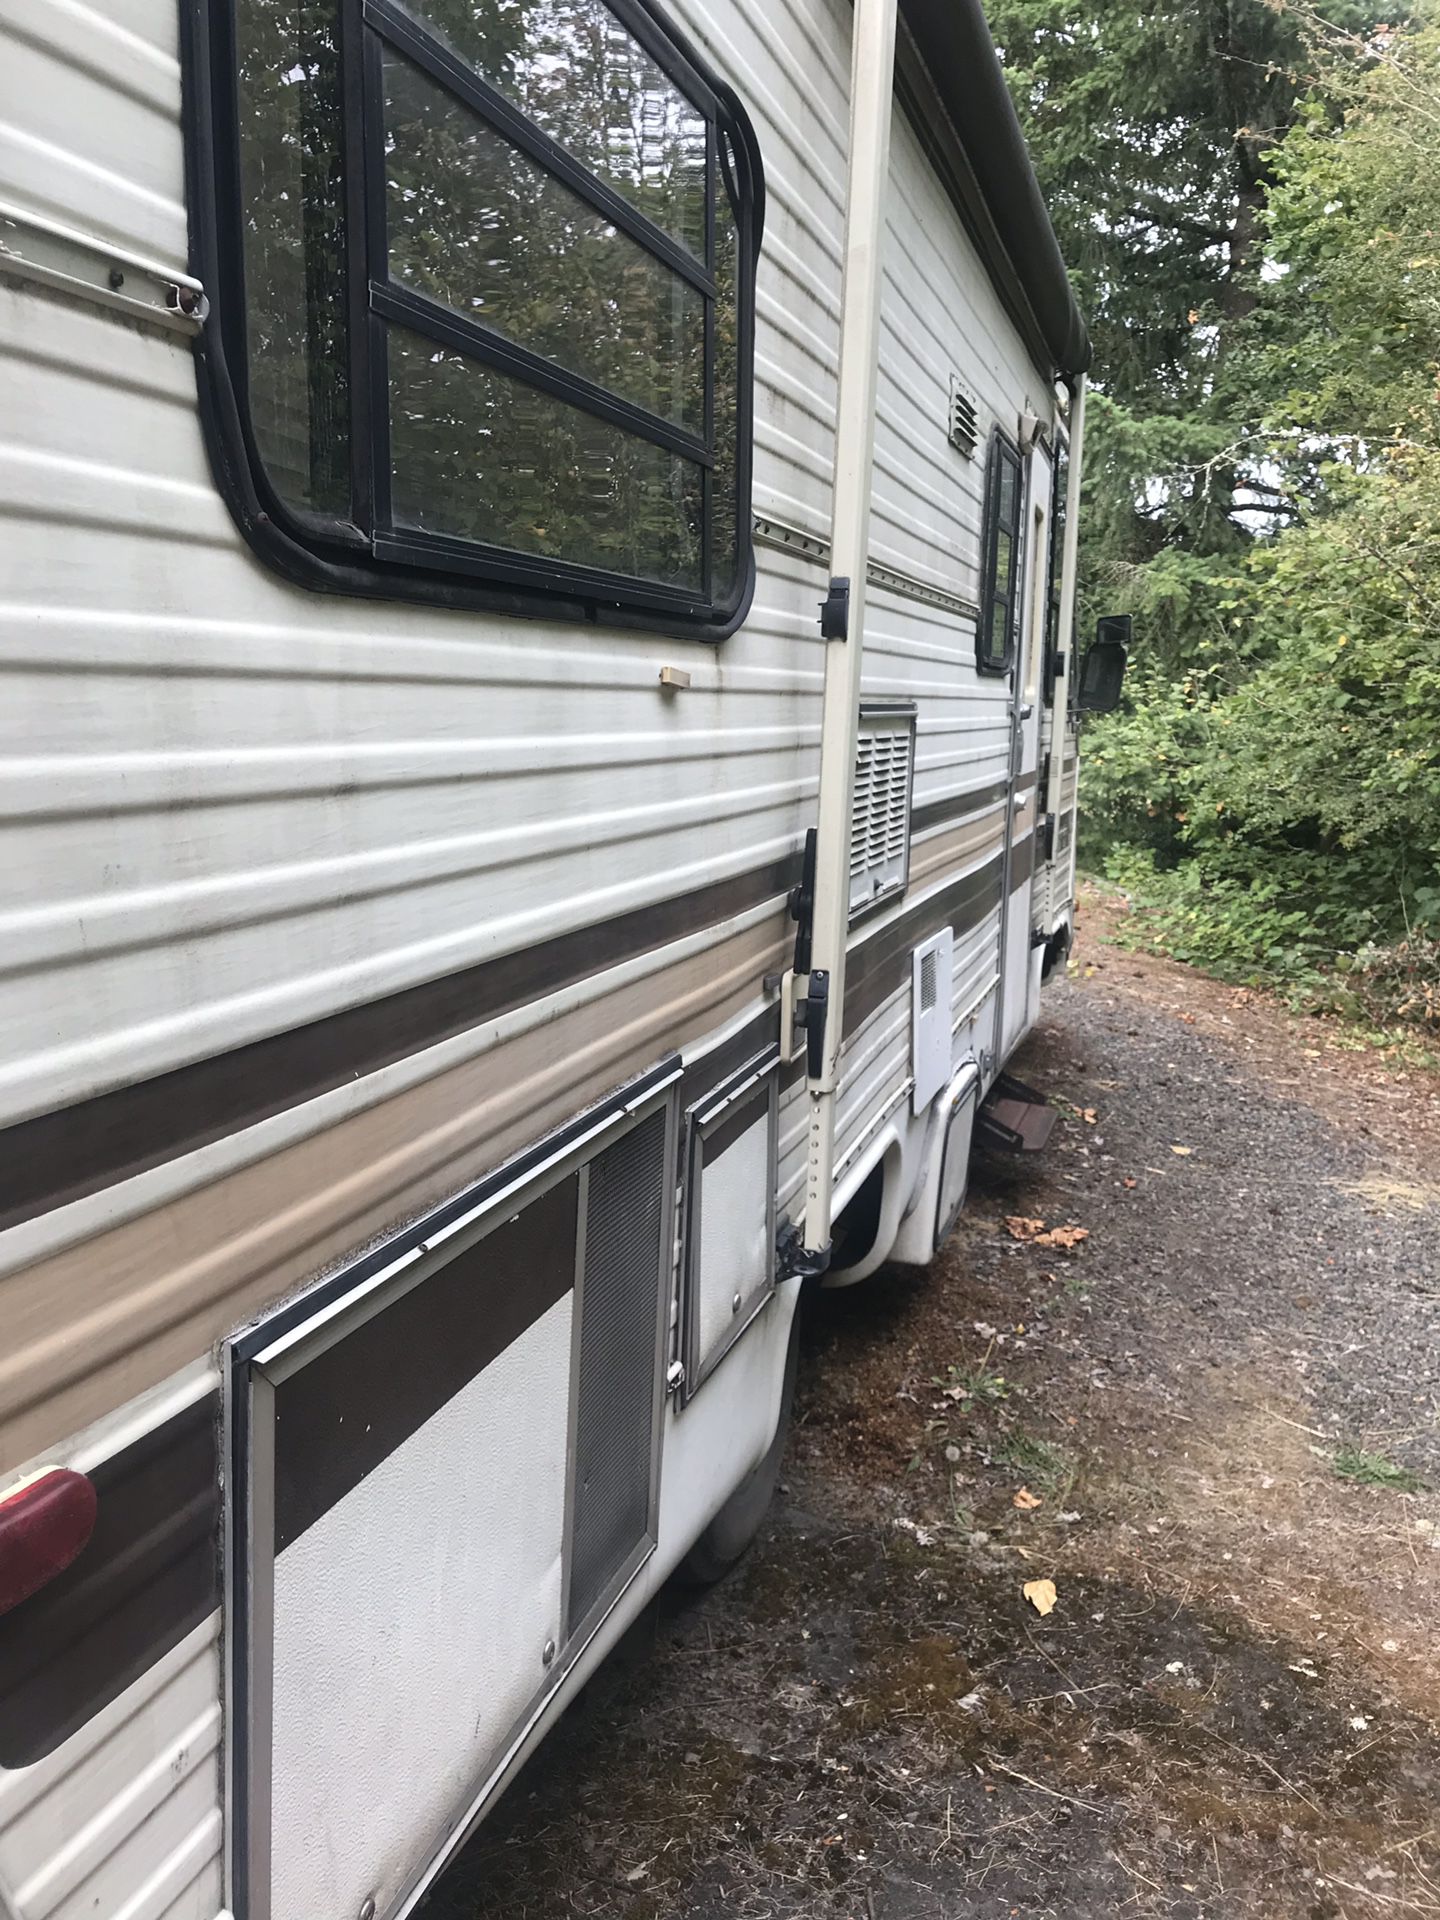 1984 Chevy Eldorado Motorhome for sale. Need gone ASAP. All offers considered.